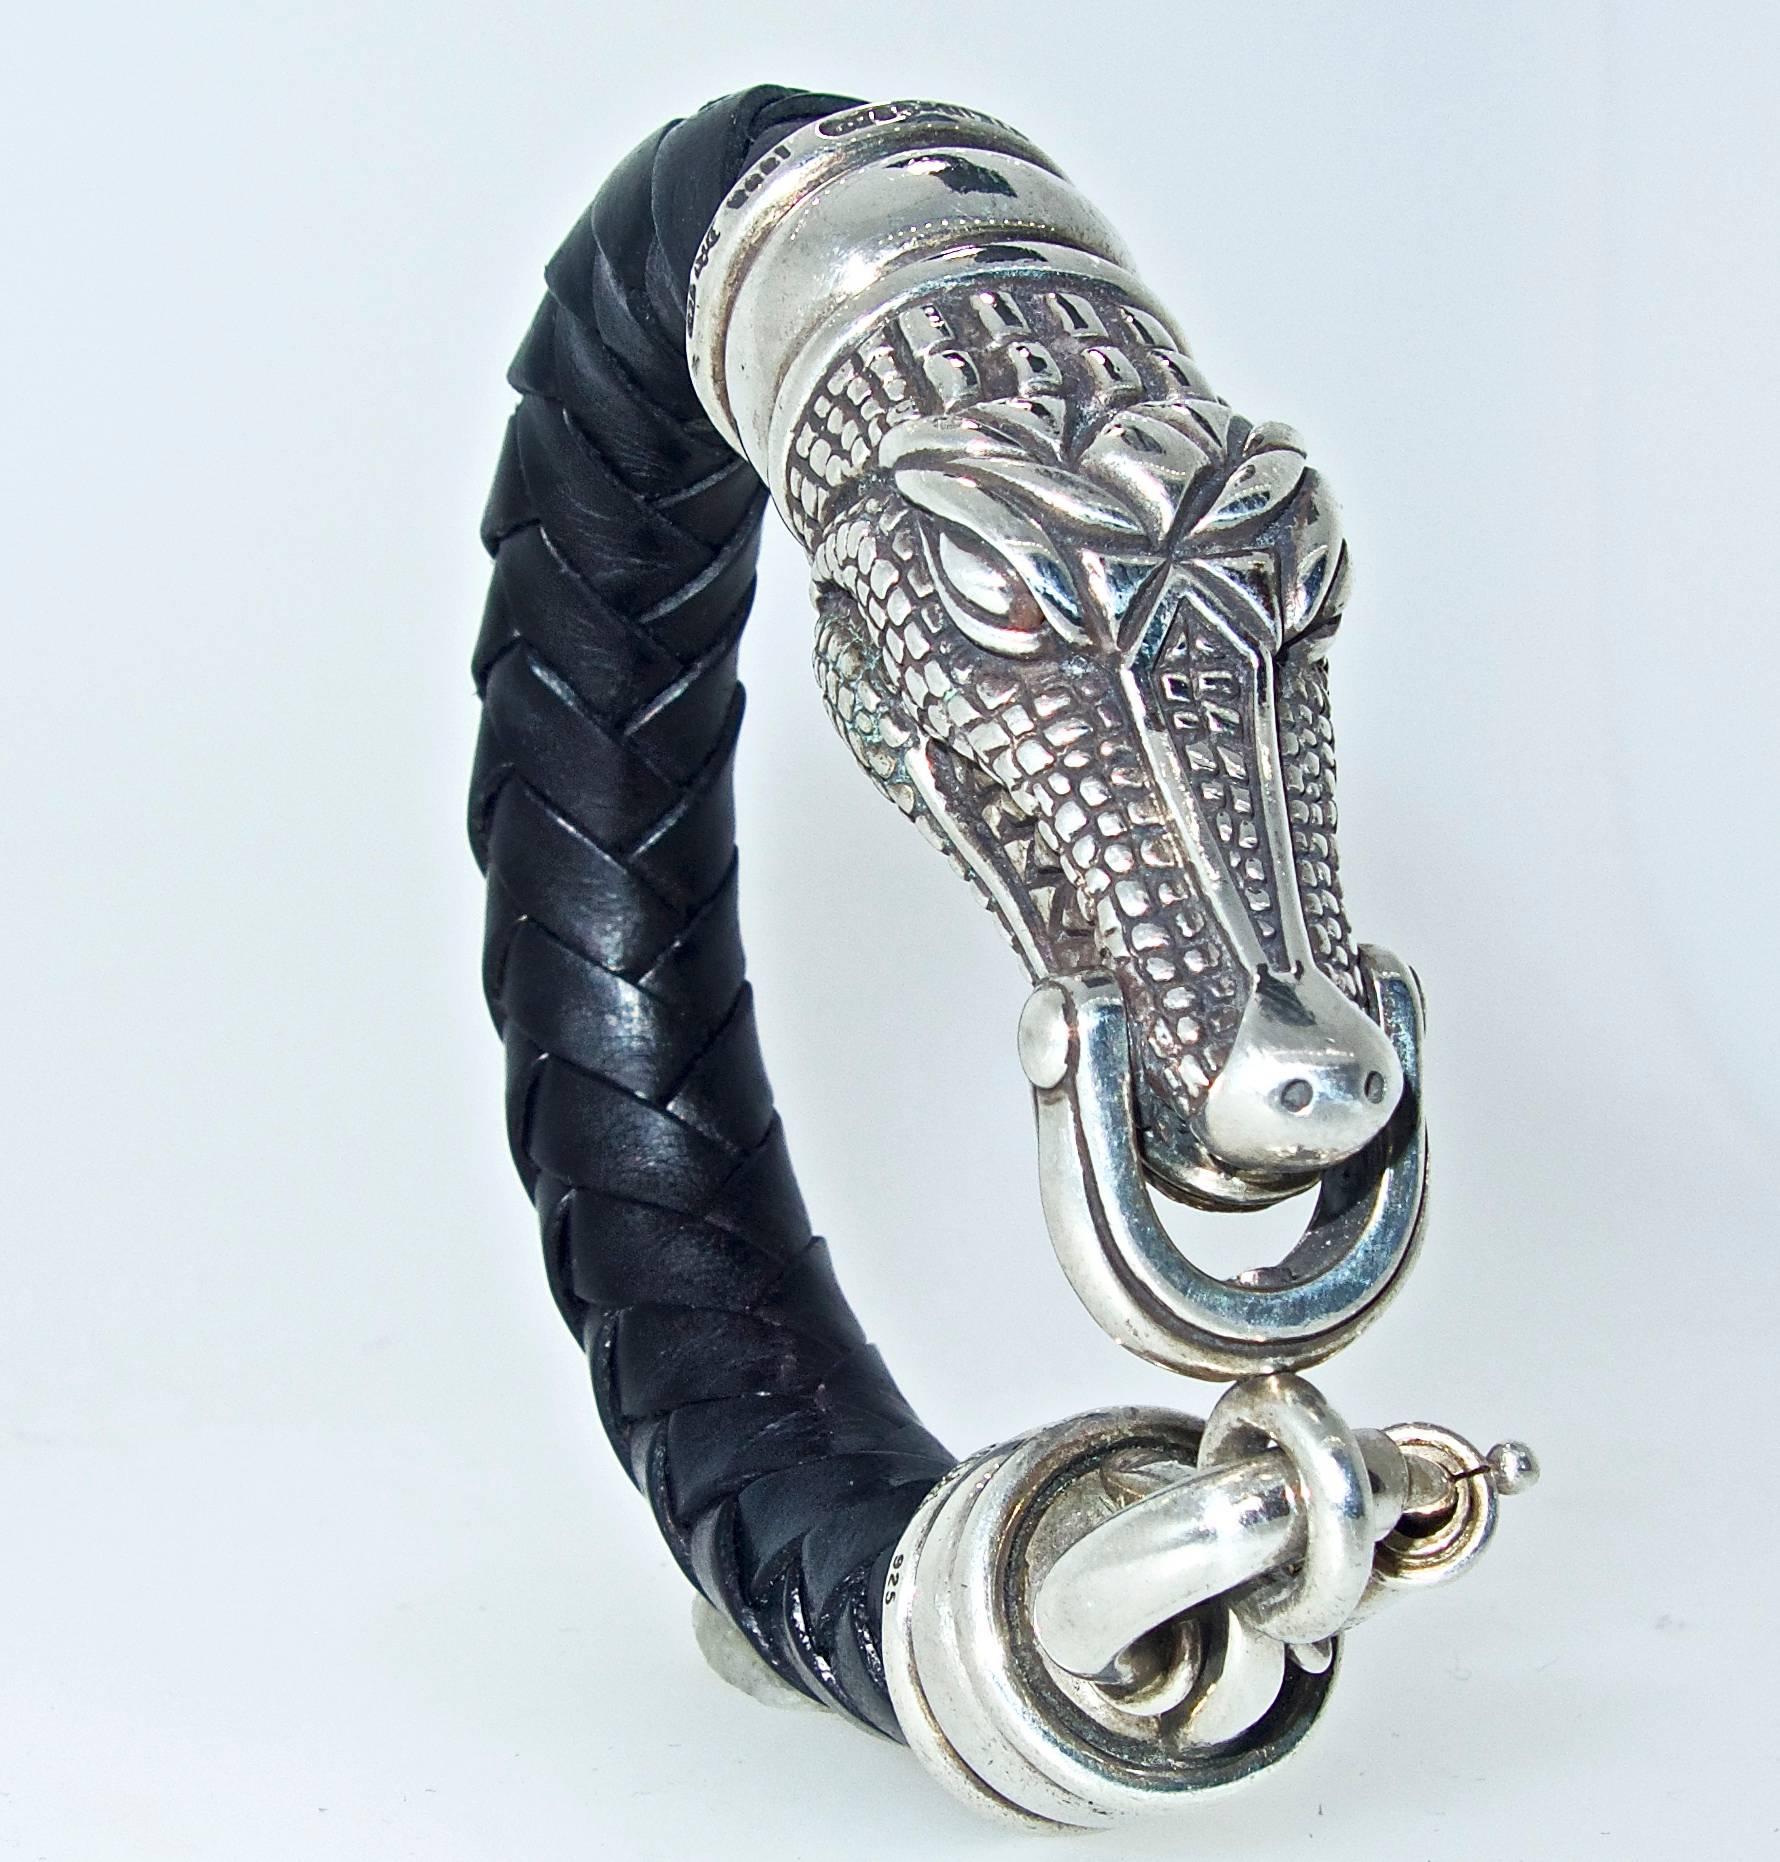 Sterling silver and braided leather alligator motif bracelet by B. Kieselstein-cord.  The interior dimension is 7.25 inches.  Signed with the year 1993, and their moon and star logo and 925 for sterling silver.  This bracelet will fit most wrists.